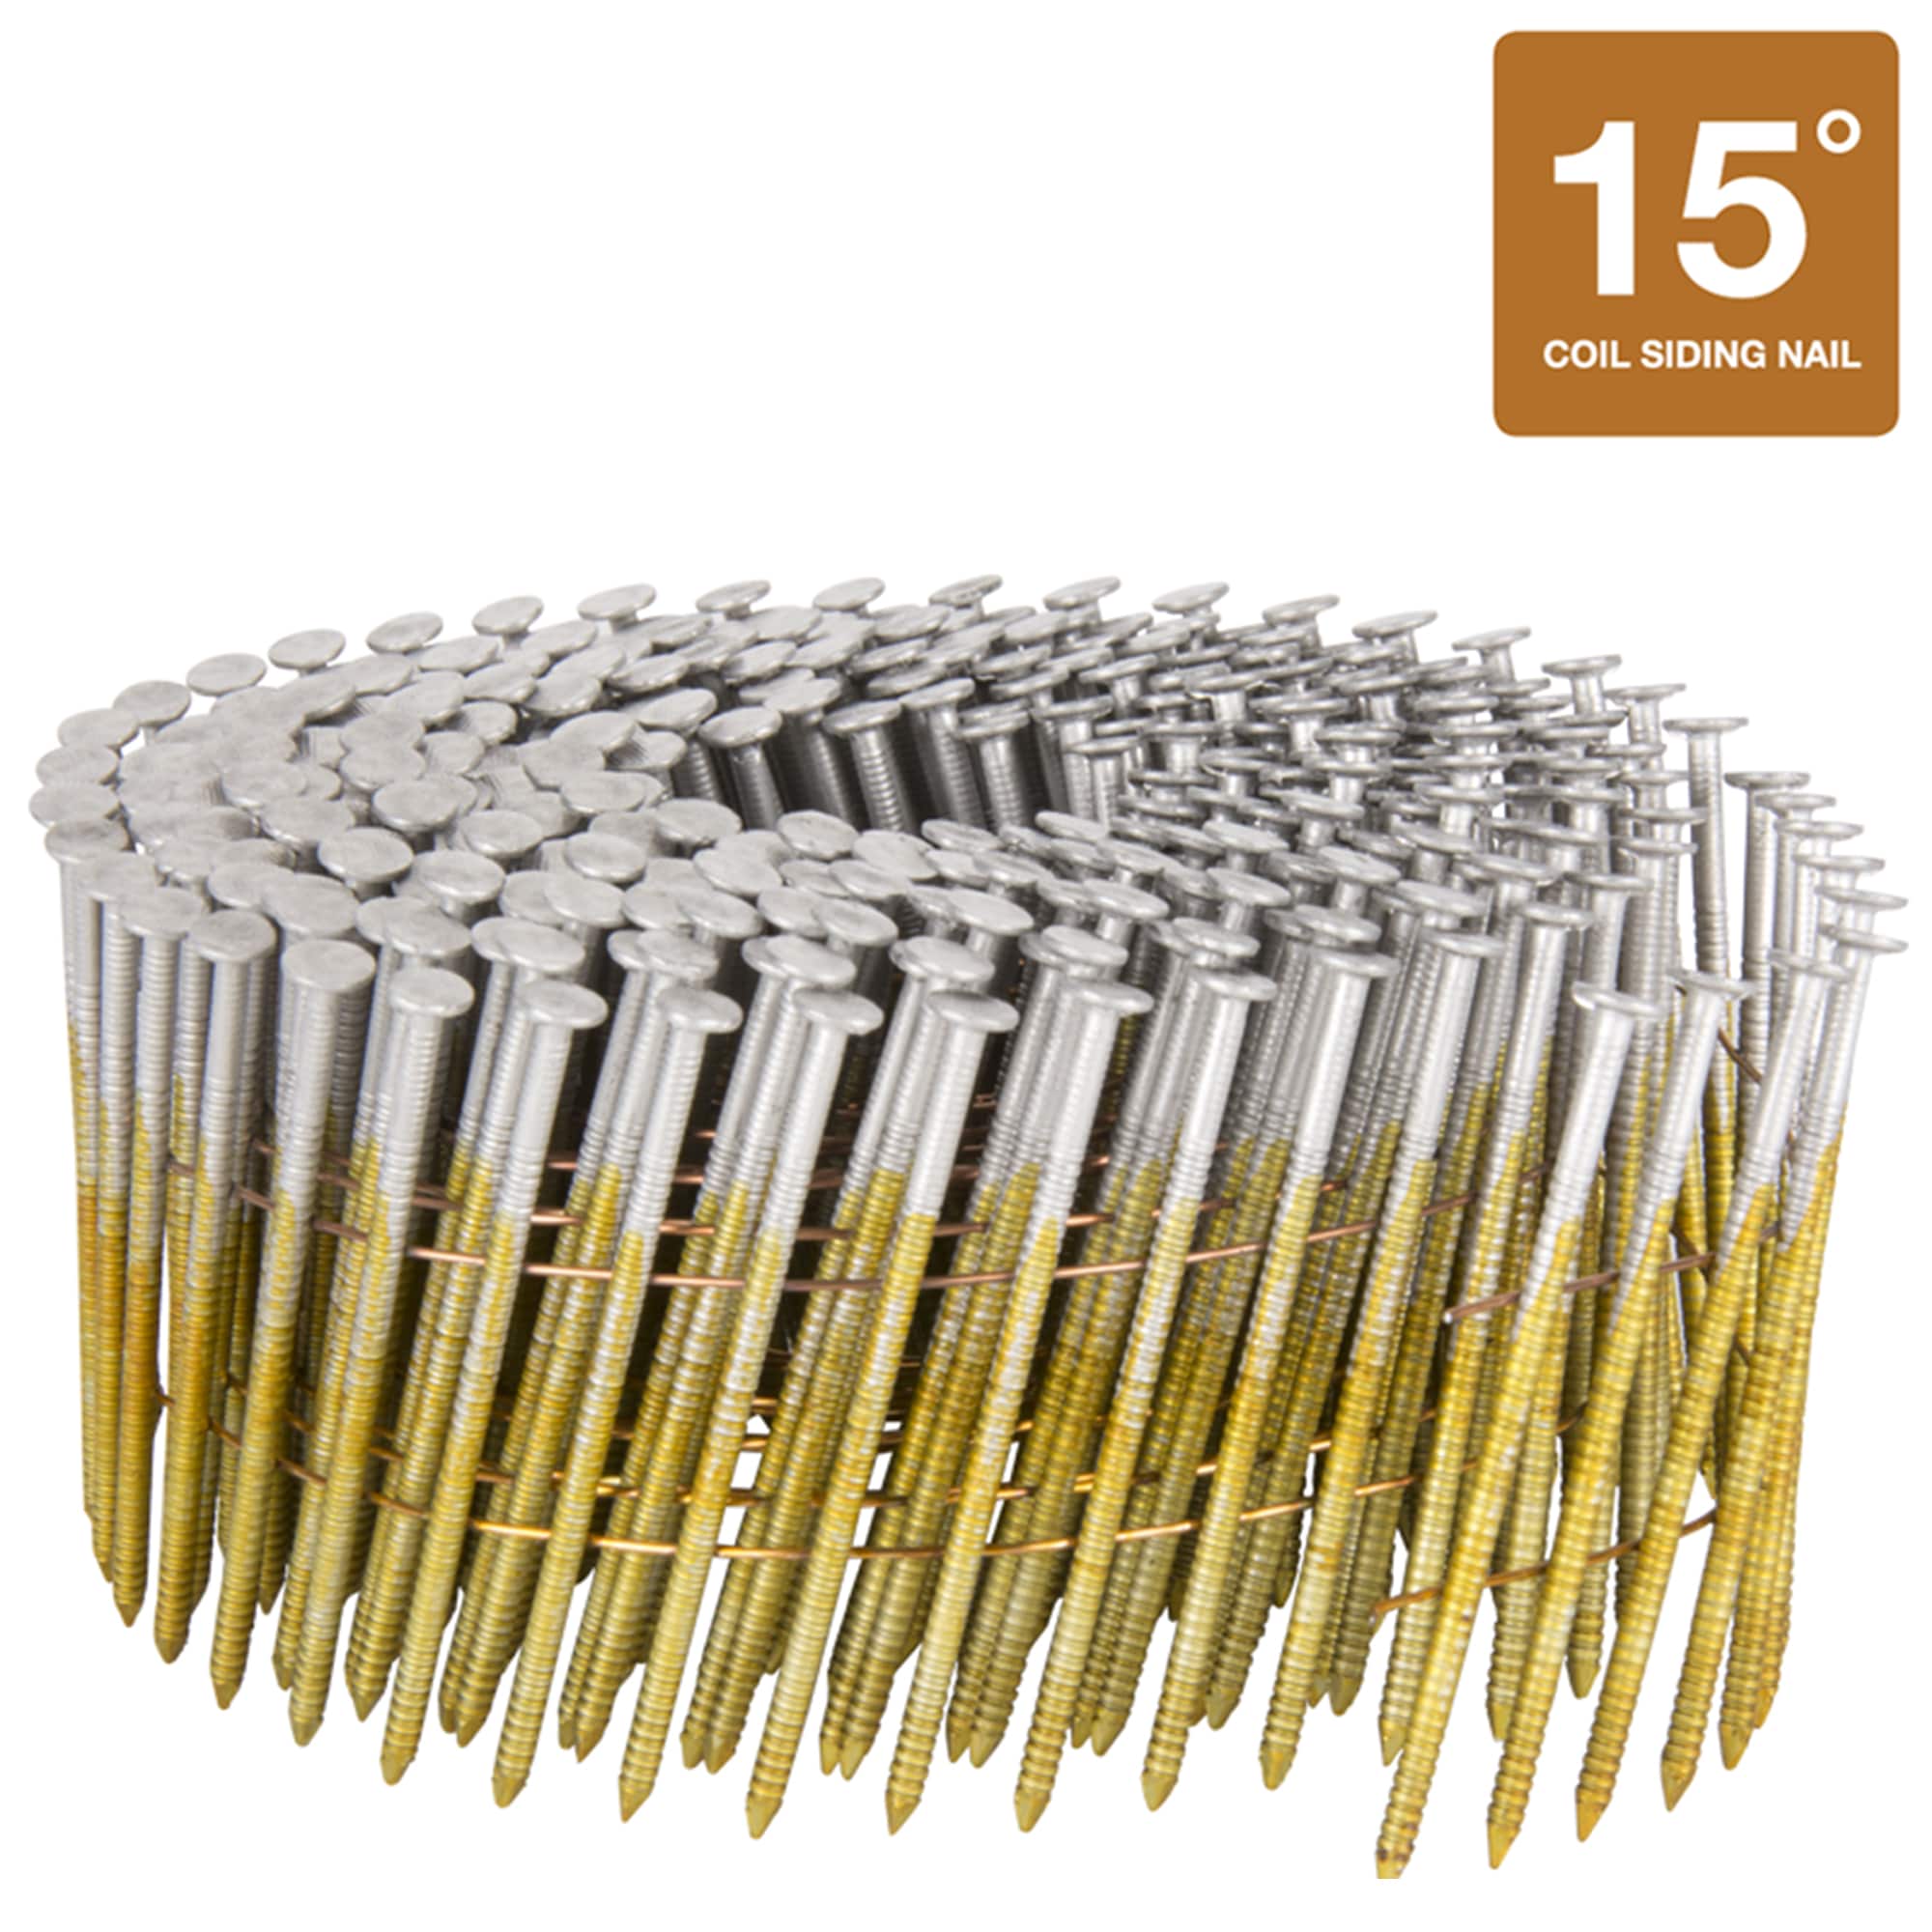 Simpson Swan Secure S13A175SNBP 1-3/4-Inch by 0.090 Ring Shank Wire Weld  15-Degree T-304 Stainless Steel Coil Siding Nails, 1200 per Pack :  Amazon.ca: Tools & Home Improvement